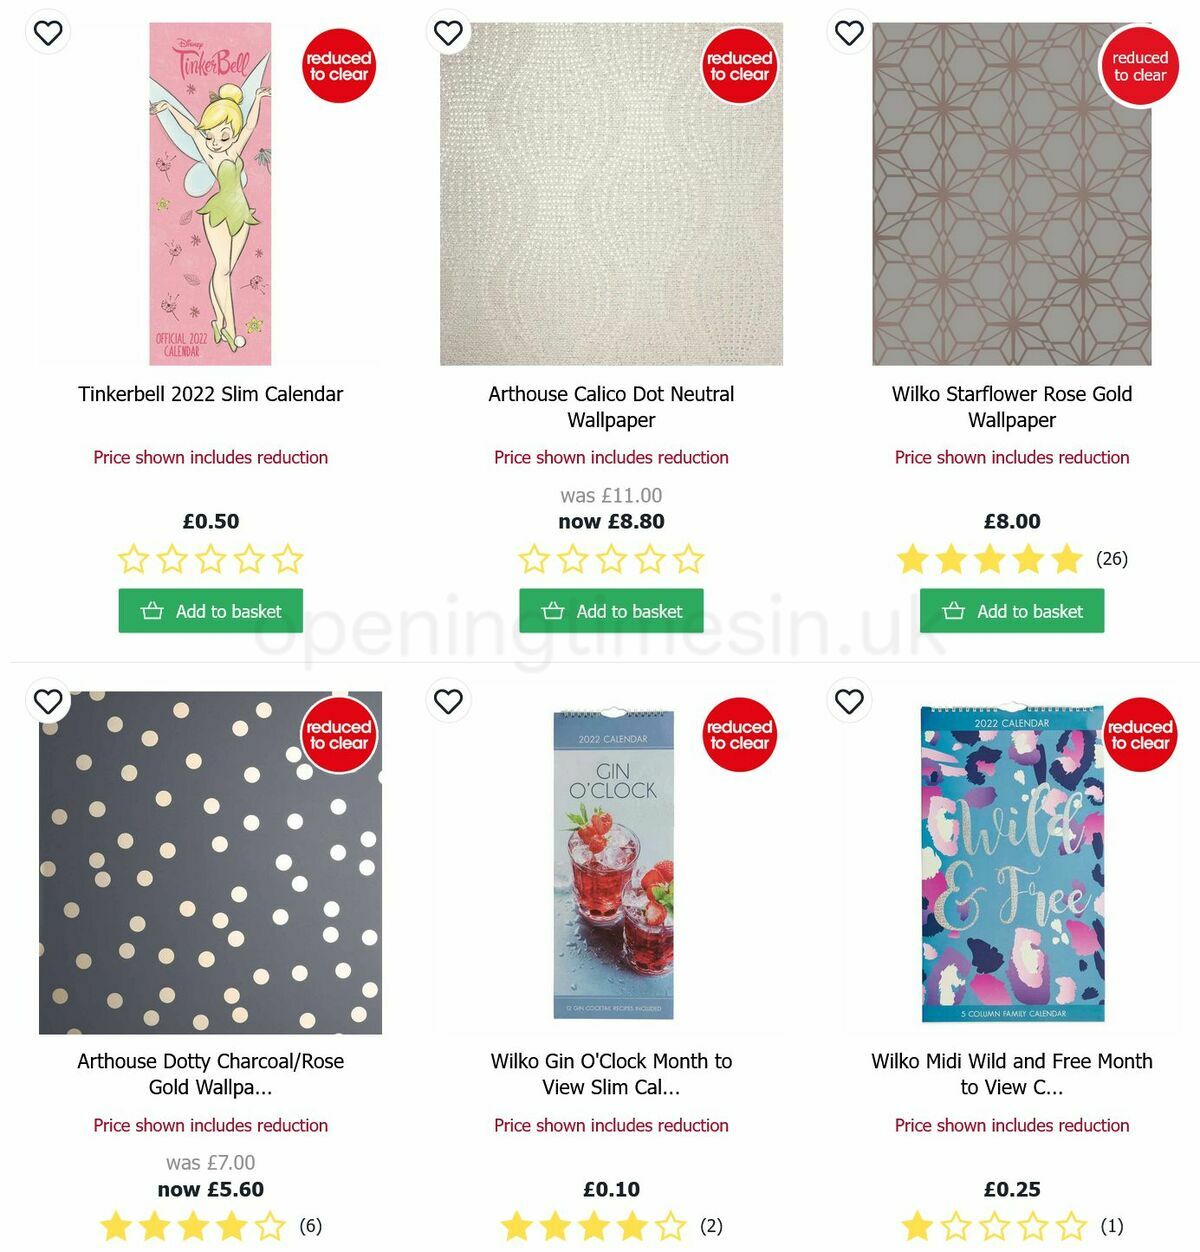 Wilko Reduced to Clear Offers from 13 March